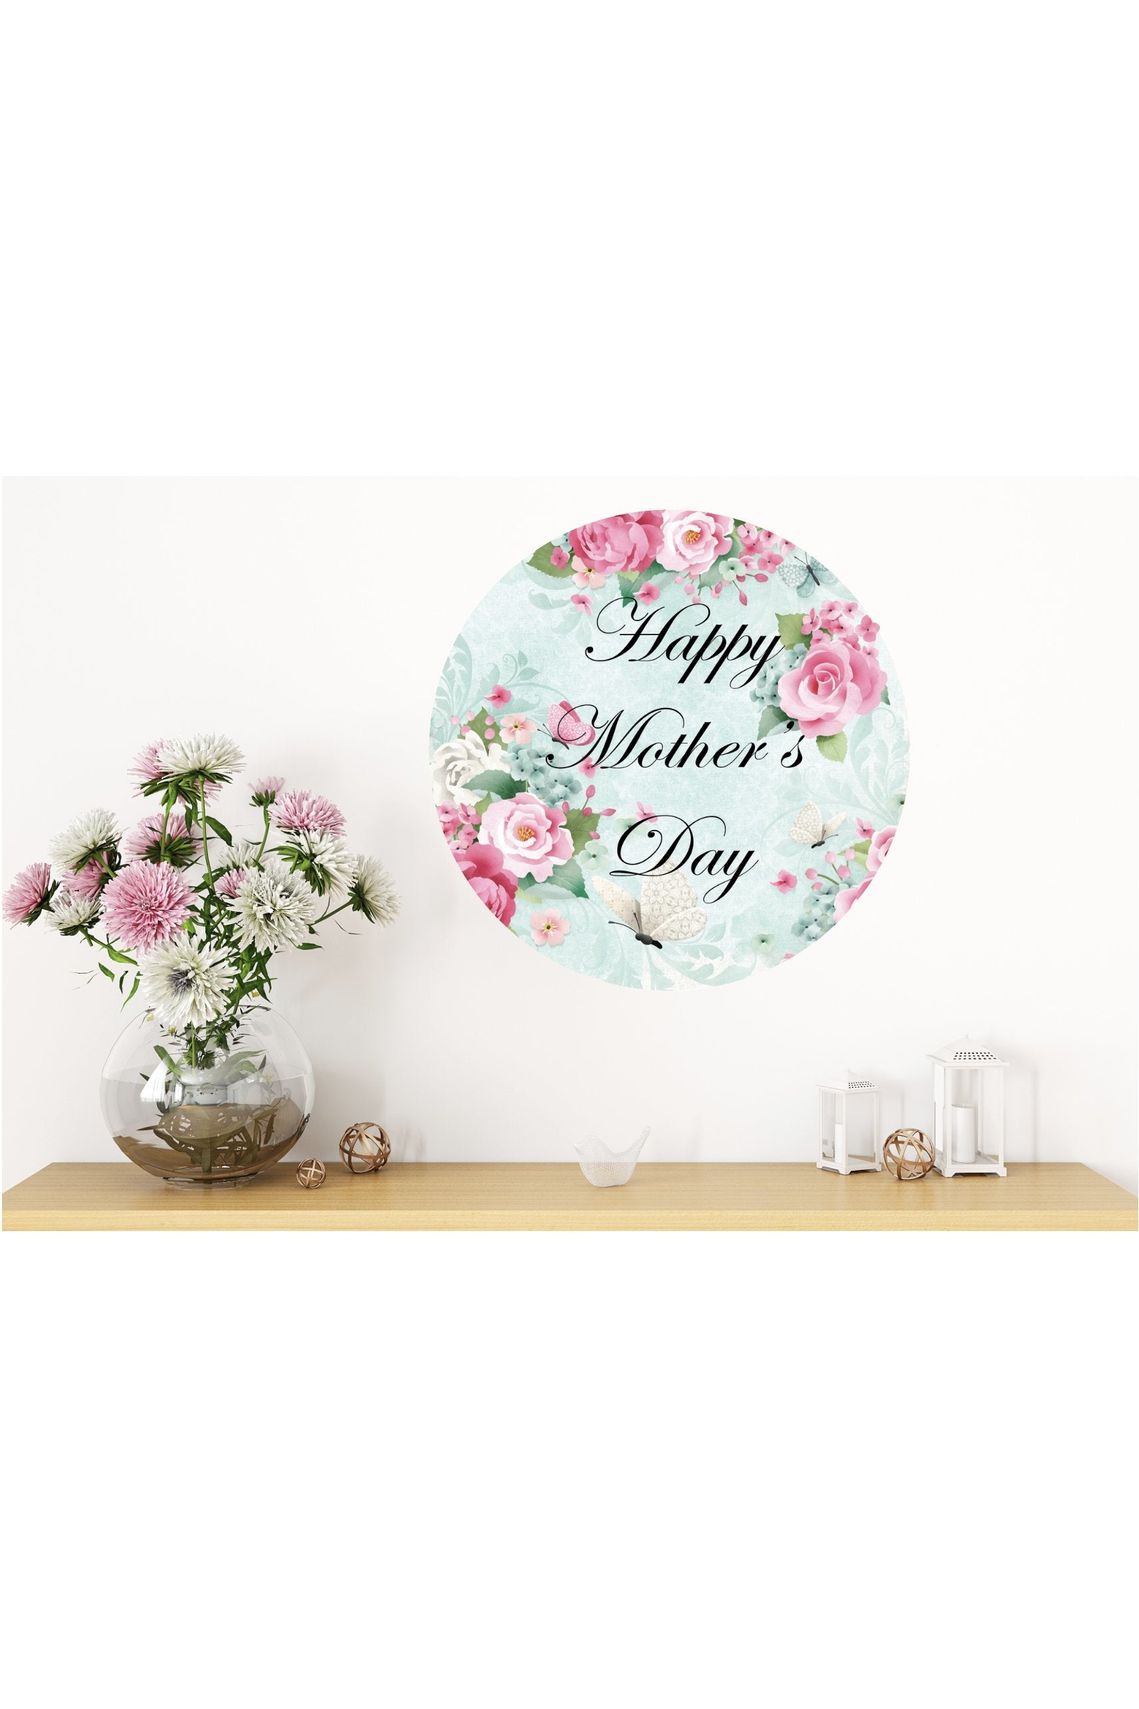 Shop For Happy Mother's Day Floral Sign - Wreath Enhancement